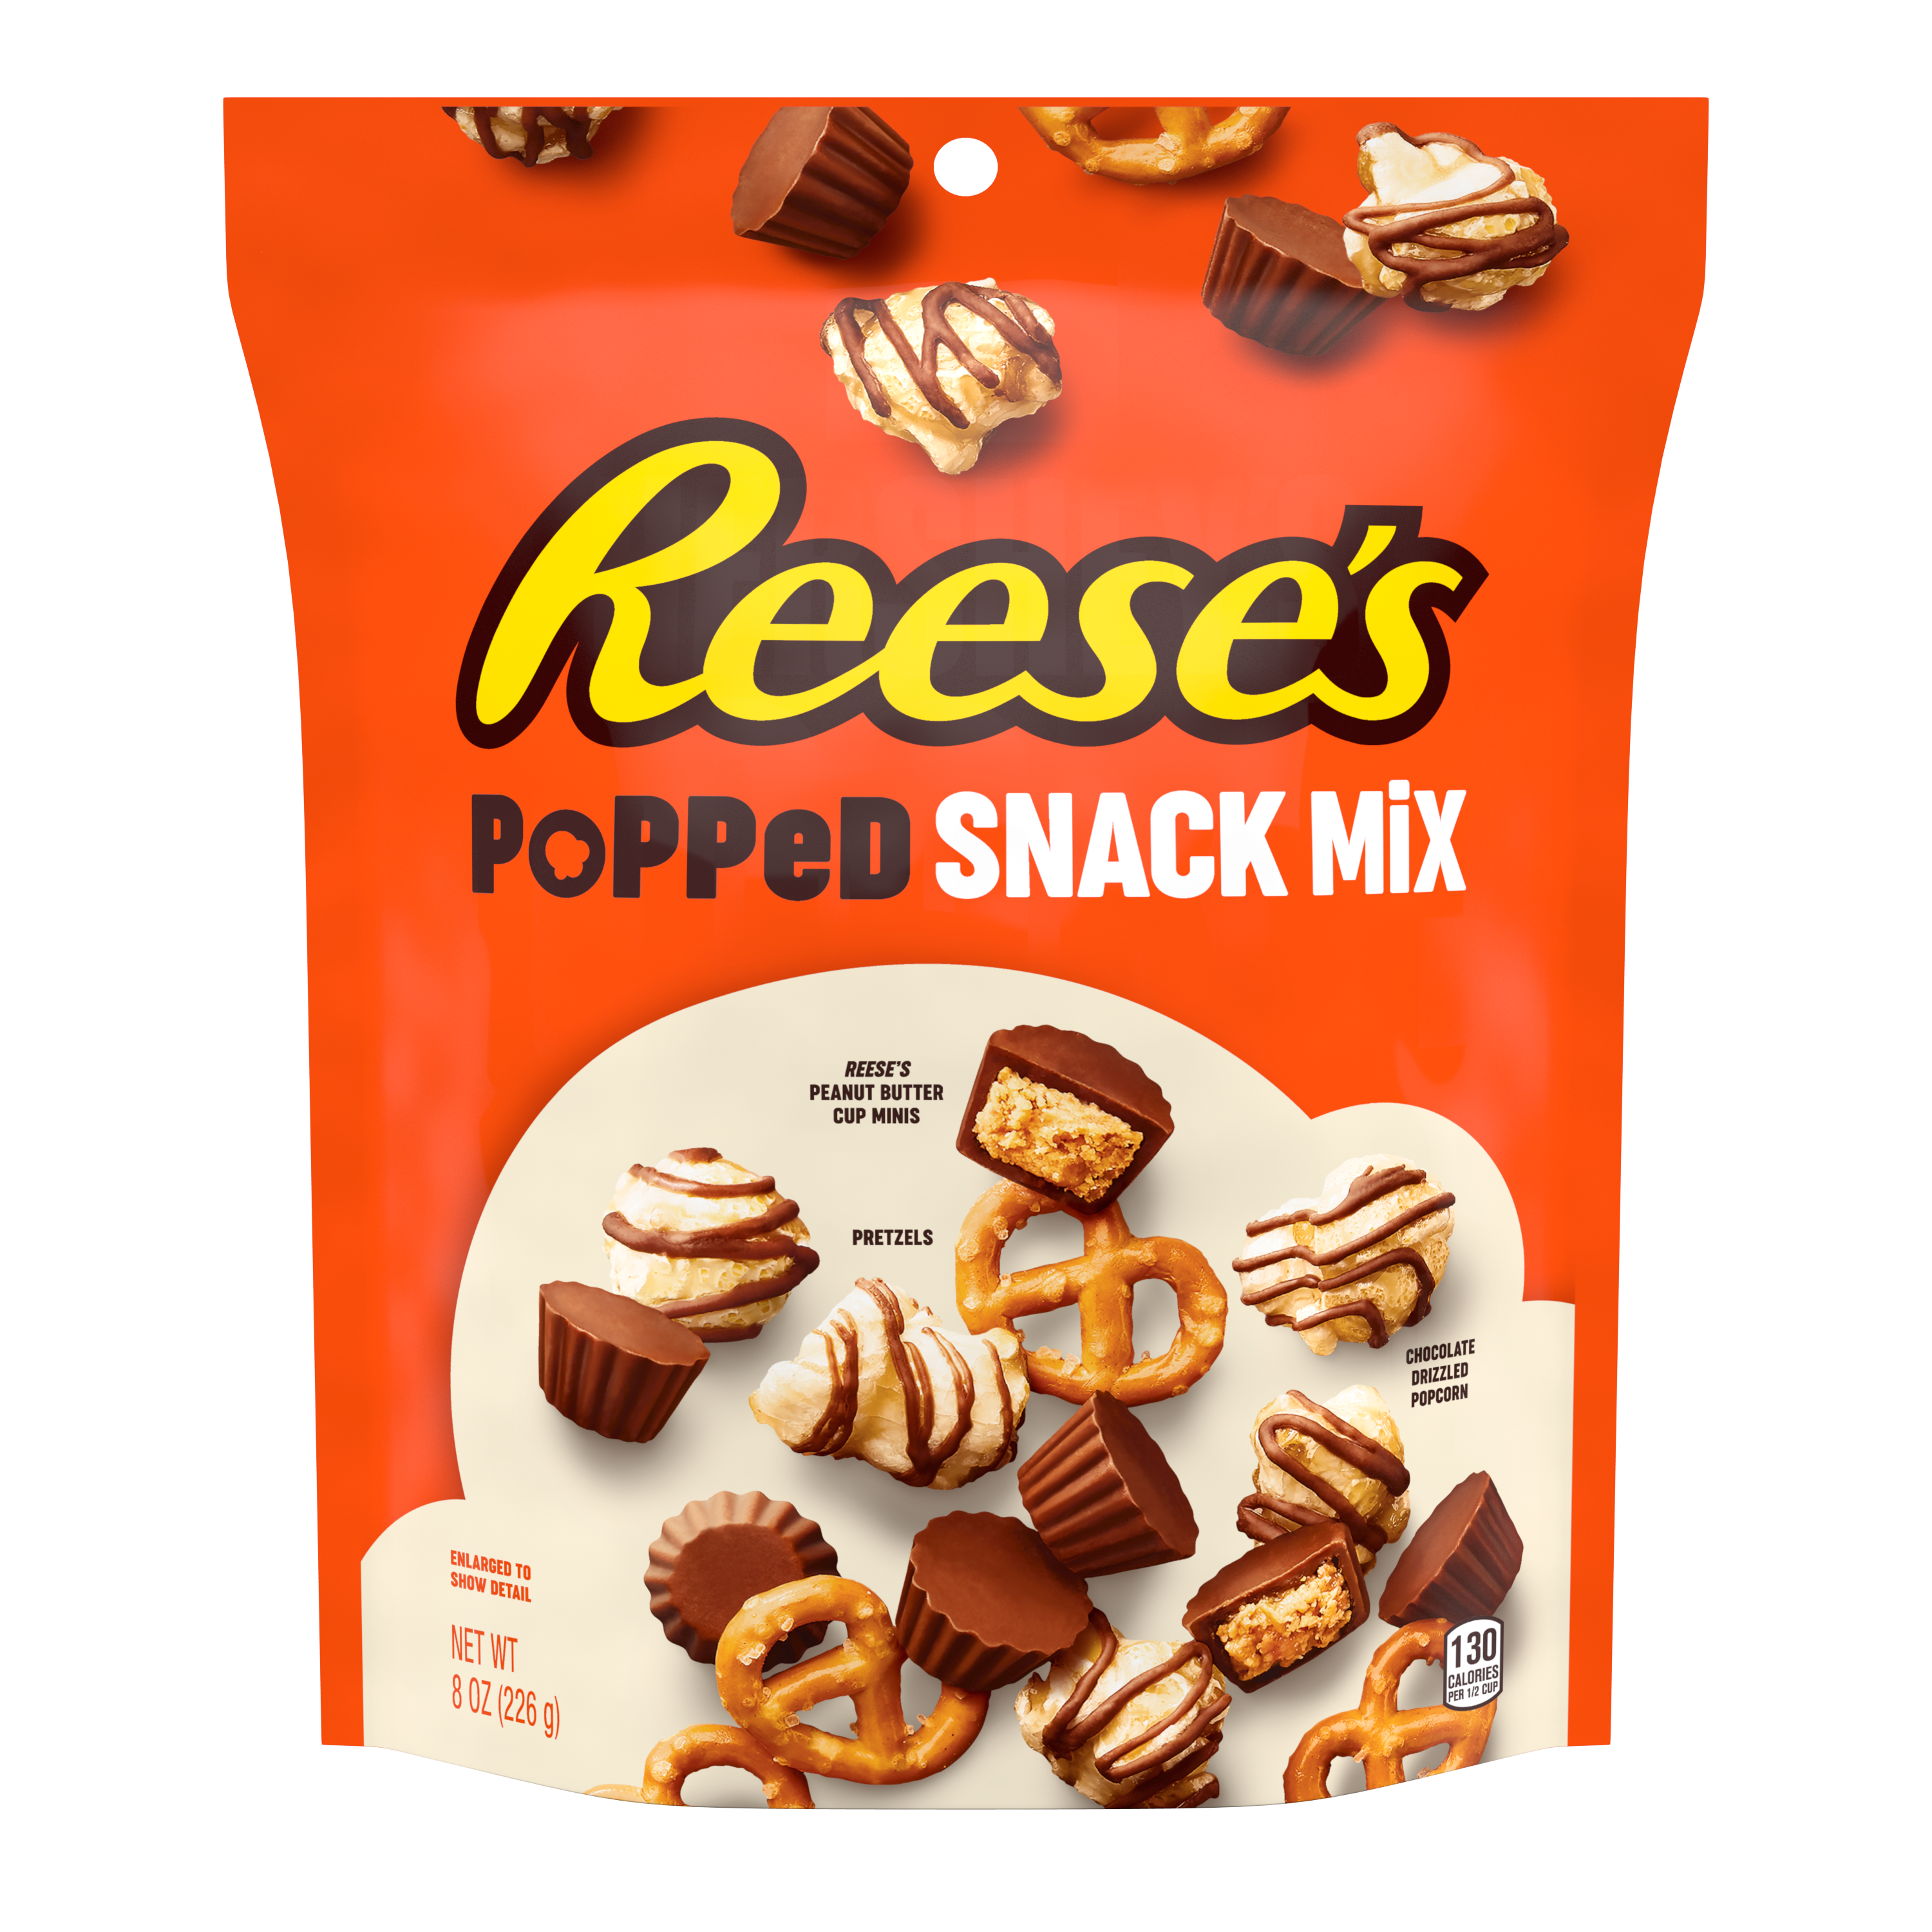 REESE'S Popped Milk Chocolate Peanut Butter Snack Mix, 8 oz bag - Front of Package